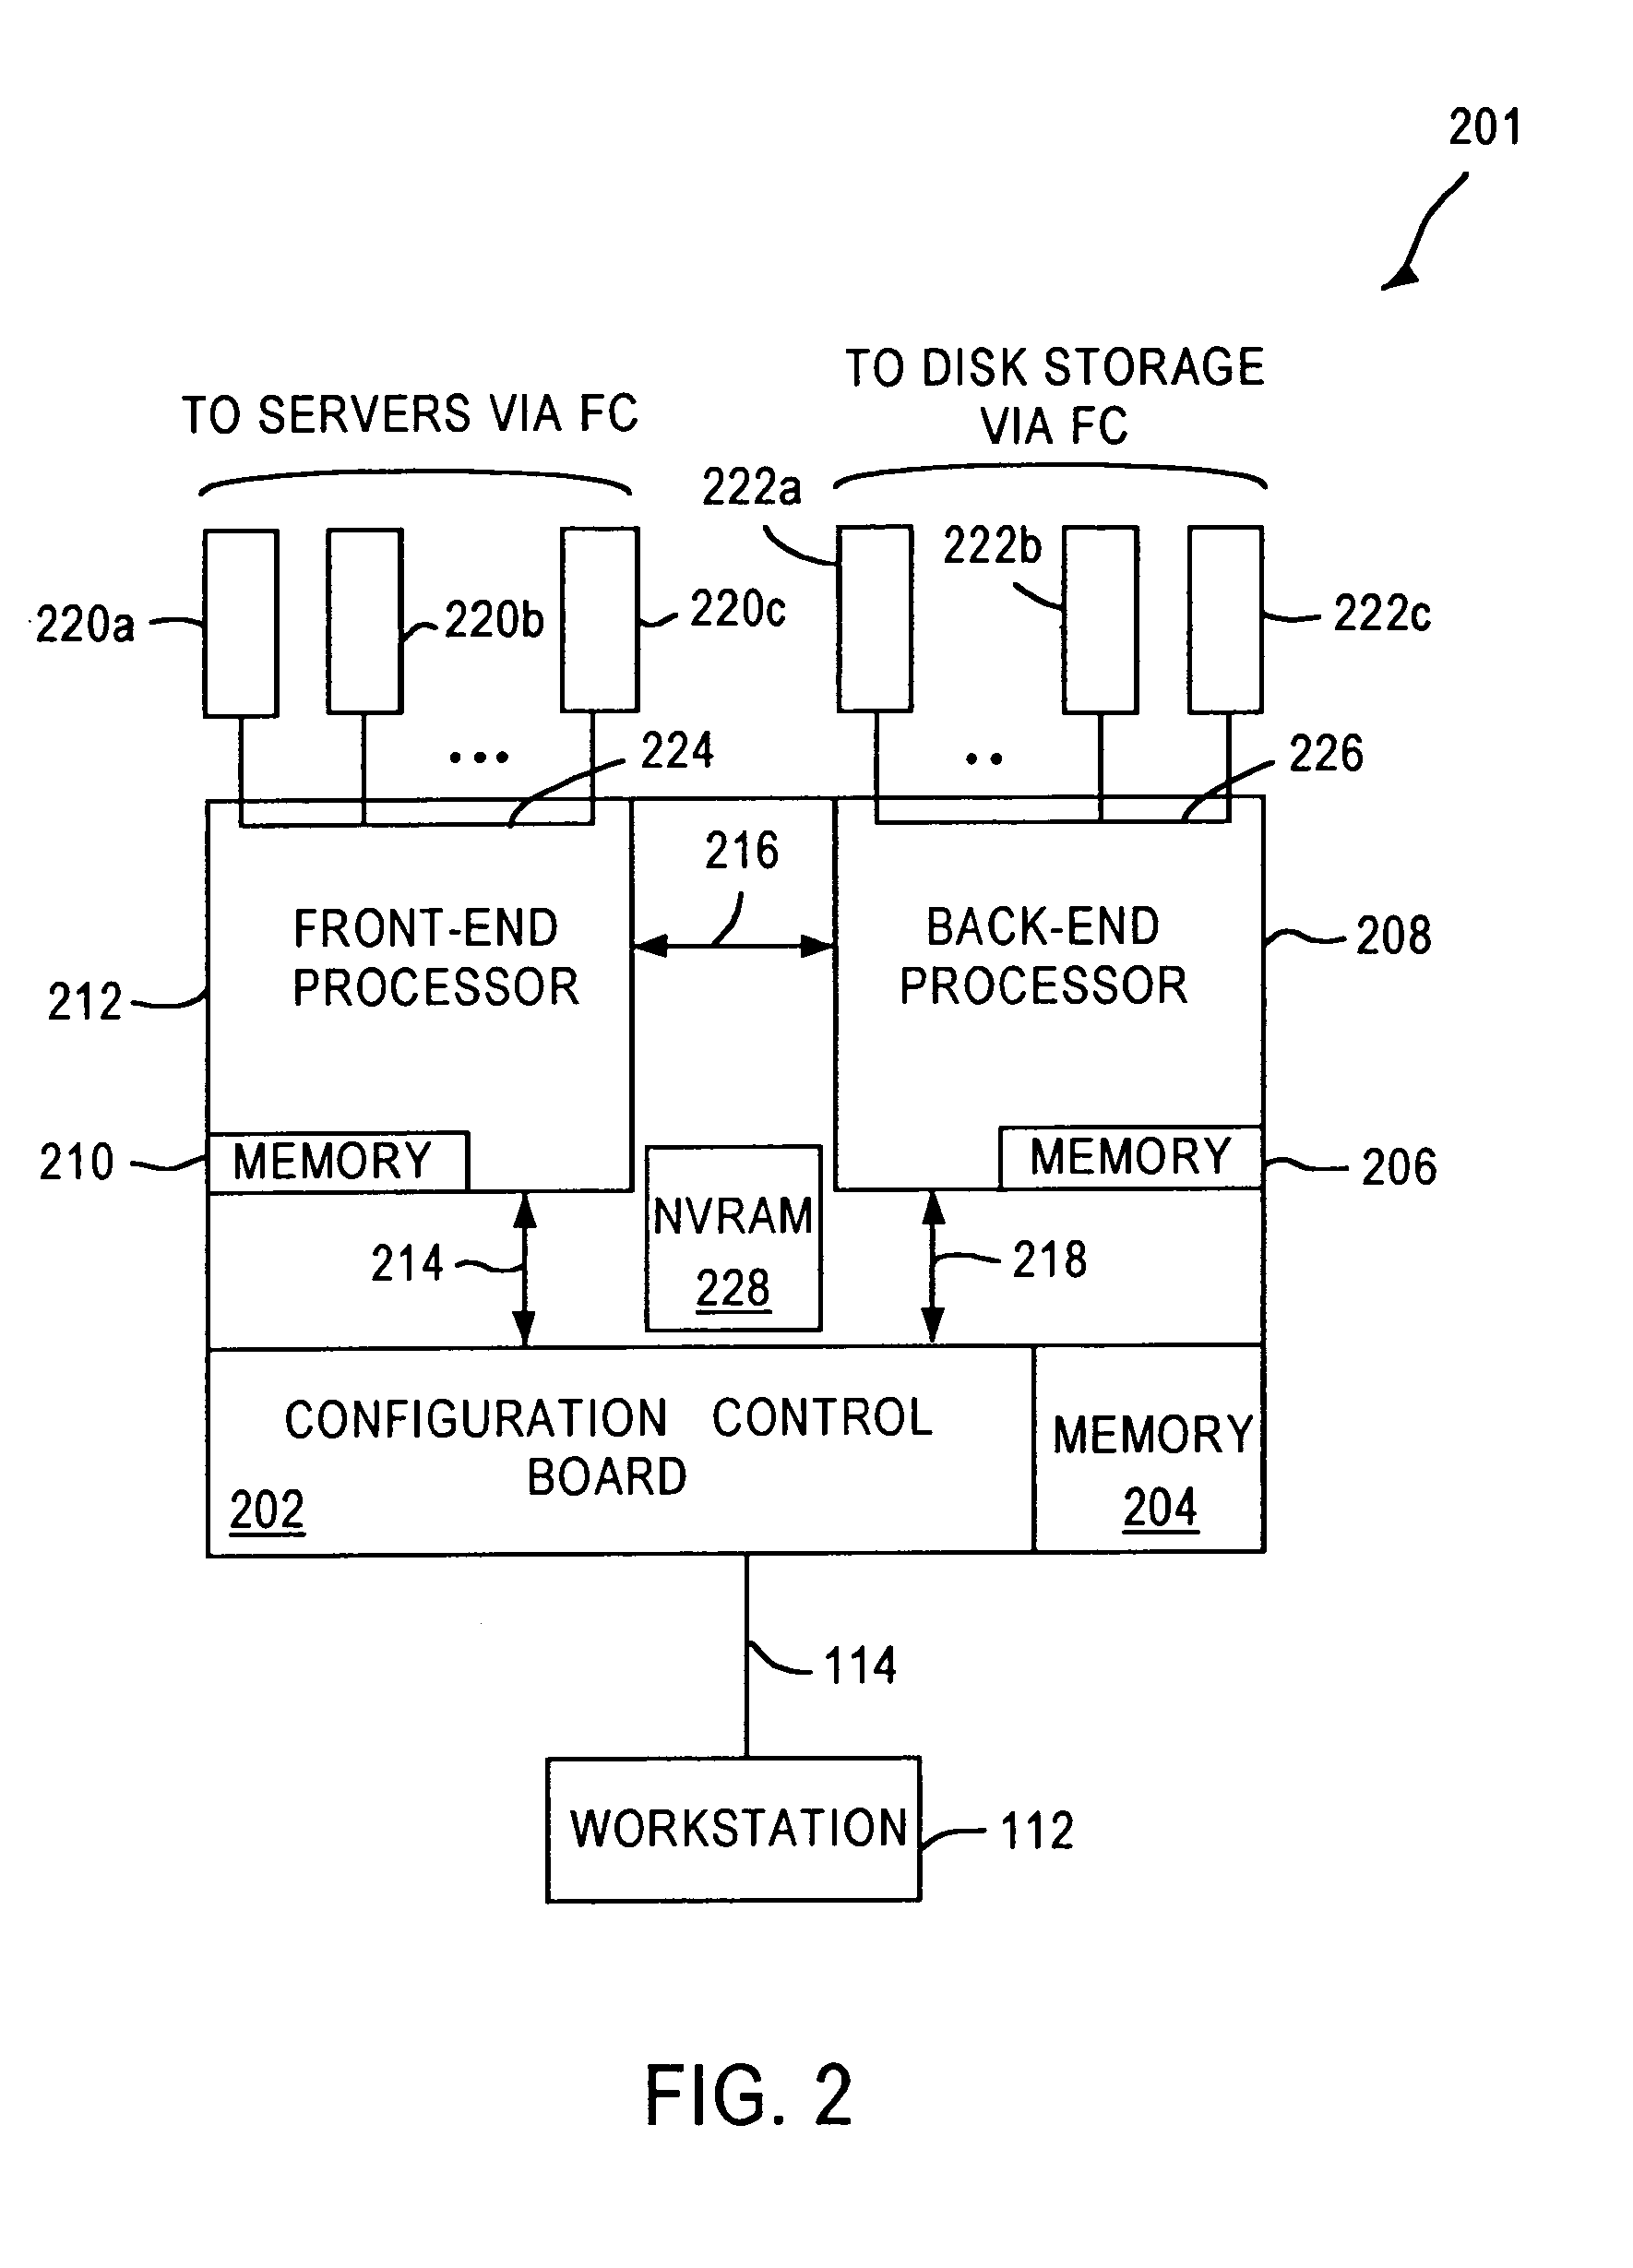 System and method for redundant communication between redundant controllers